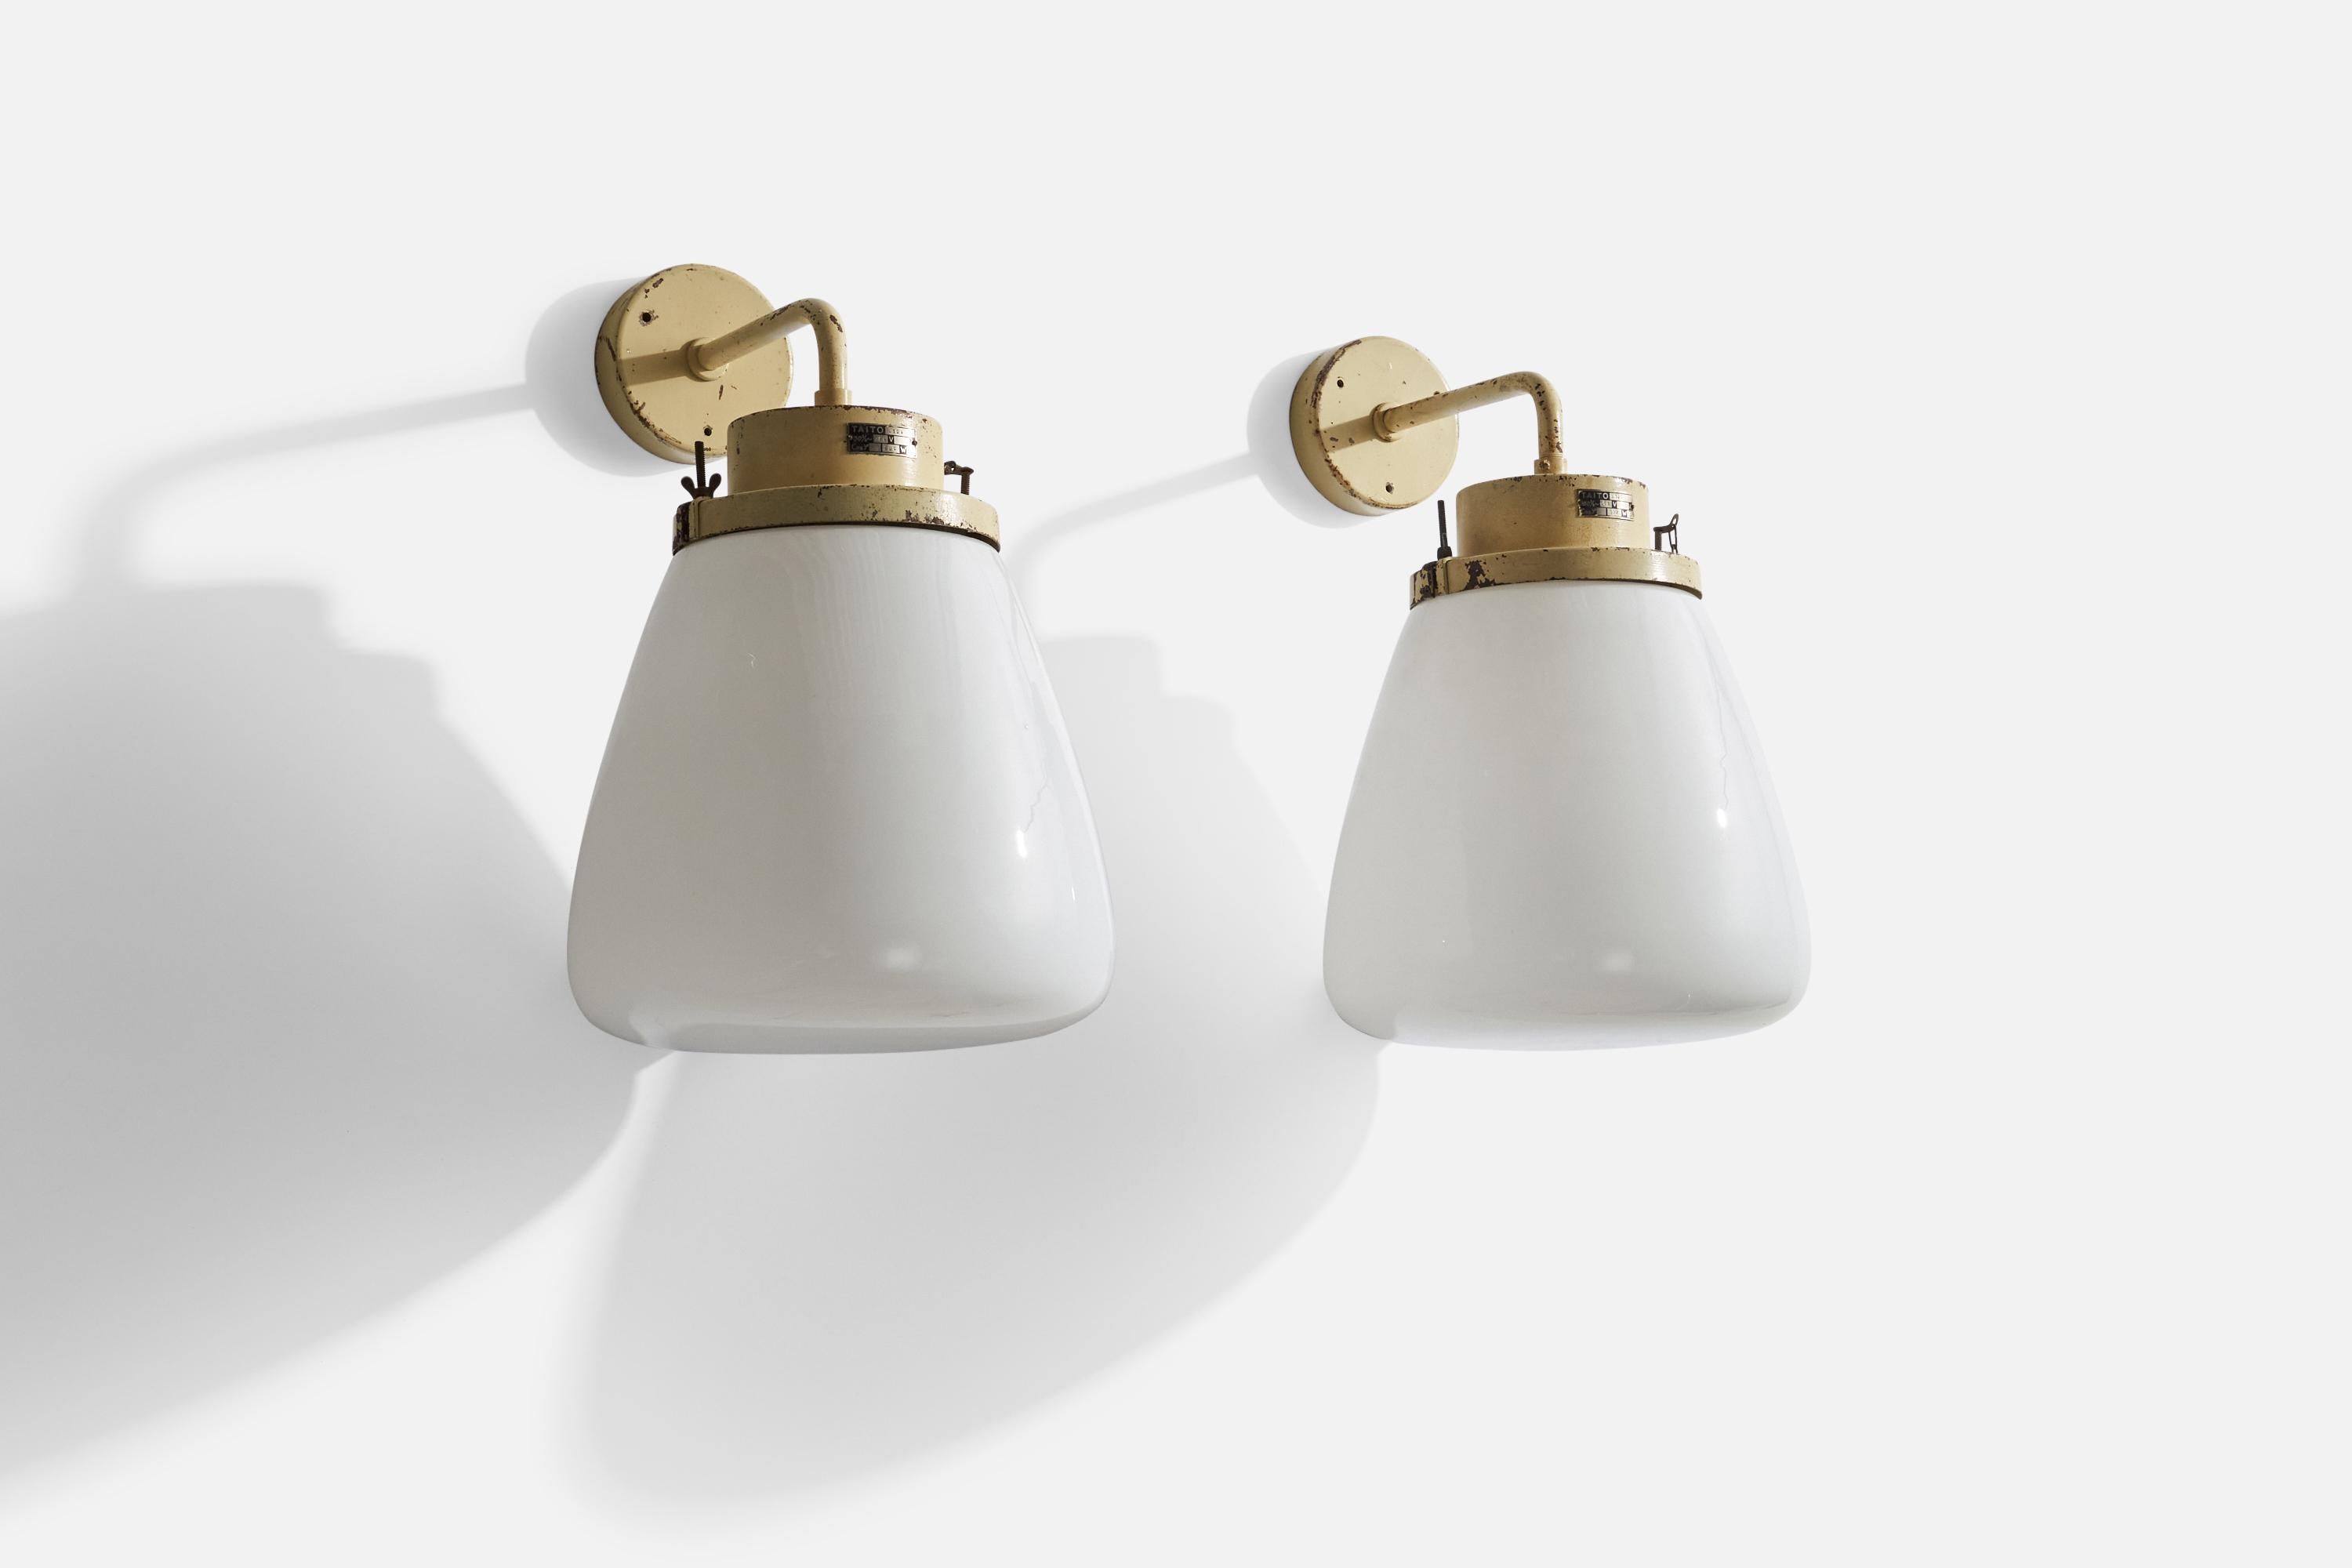 A pair of large beige-lacquered metal and opaline glass wall lights designed and produced in Finland, 1930s.

Overall Dimensions (inches): 23.63” H x 11.82” W x 16.93” D
Back Plate Dimensions (inches): 5.25 H x 5.25” W x 1.25” D
Bulb Specifications: